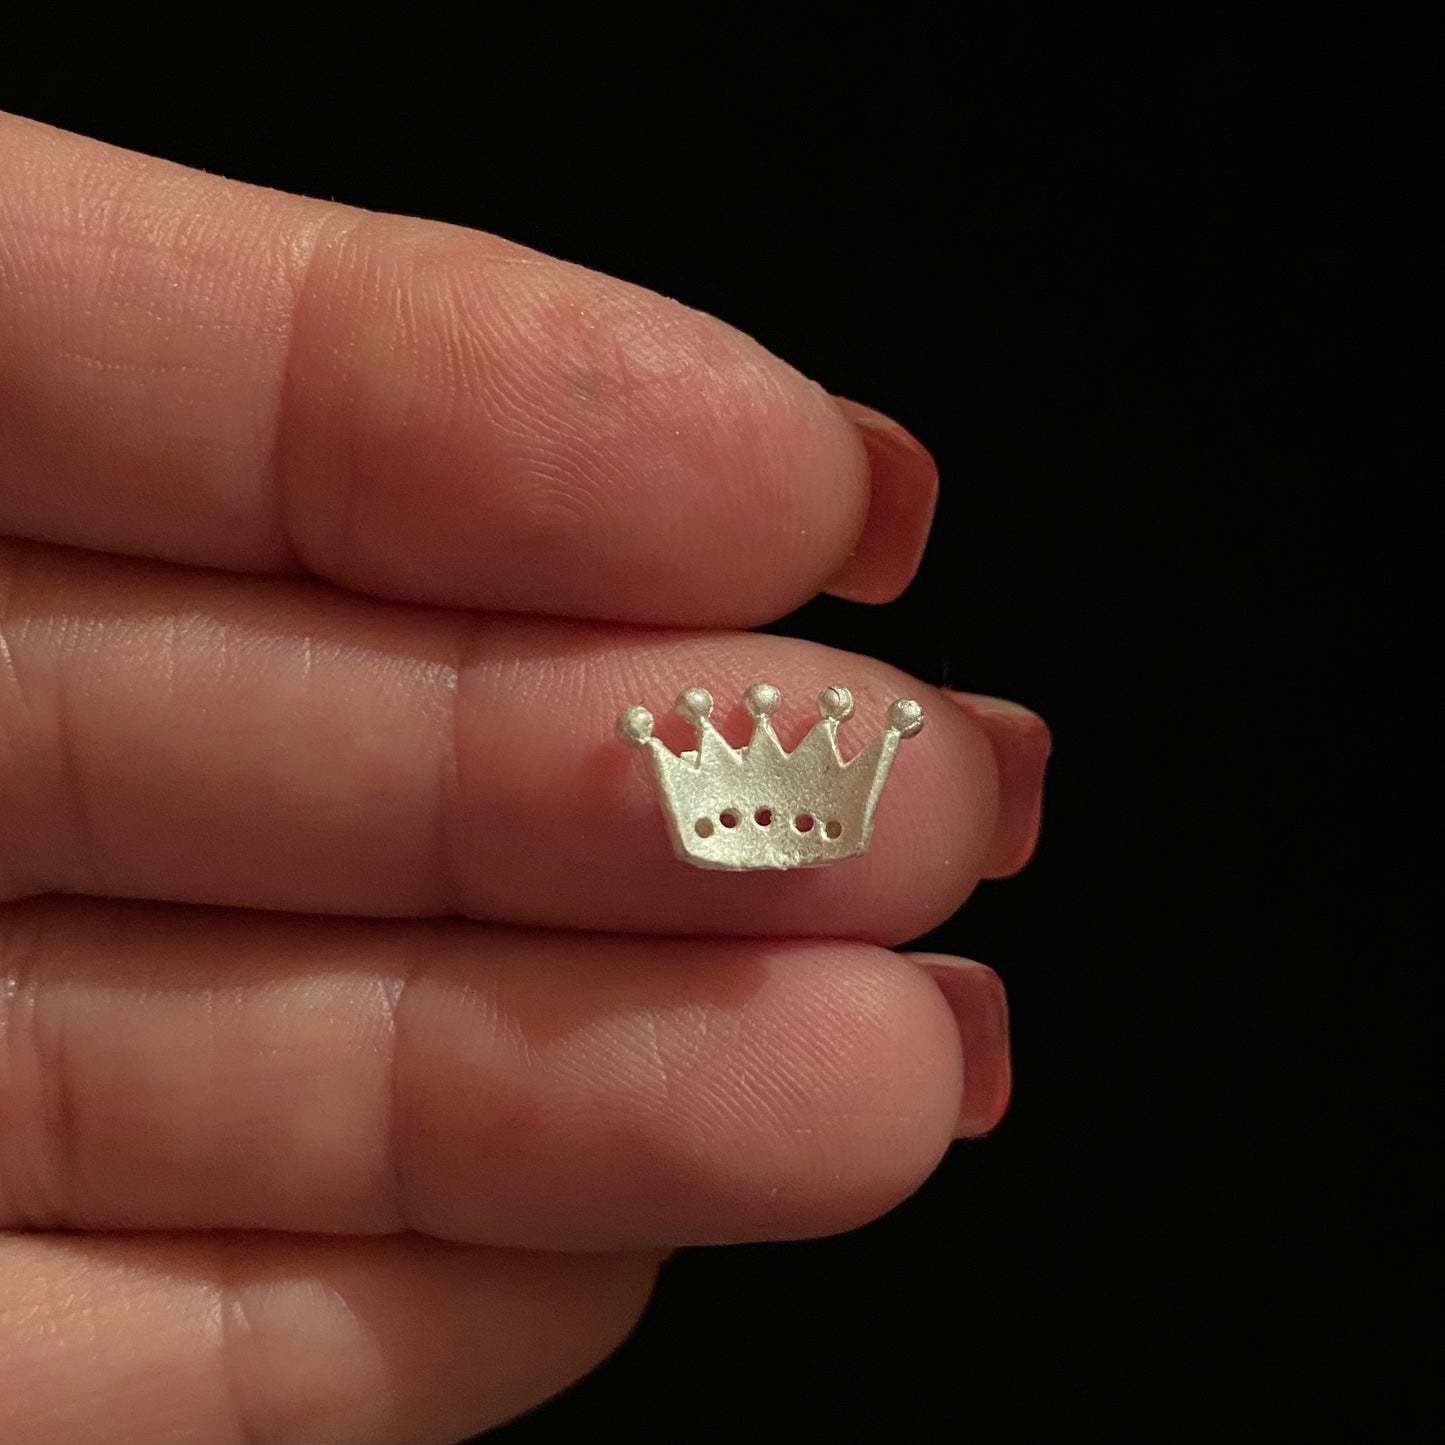 Tiny Crown Silver Casting for Jewelry Design